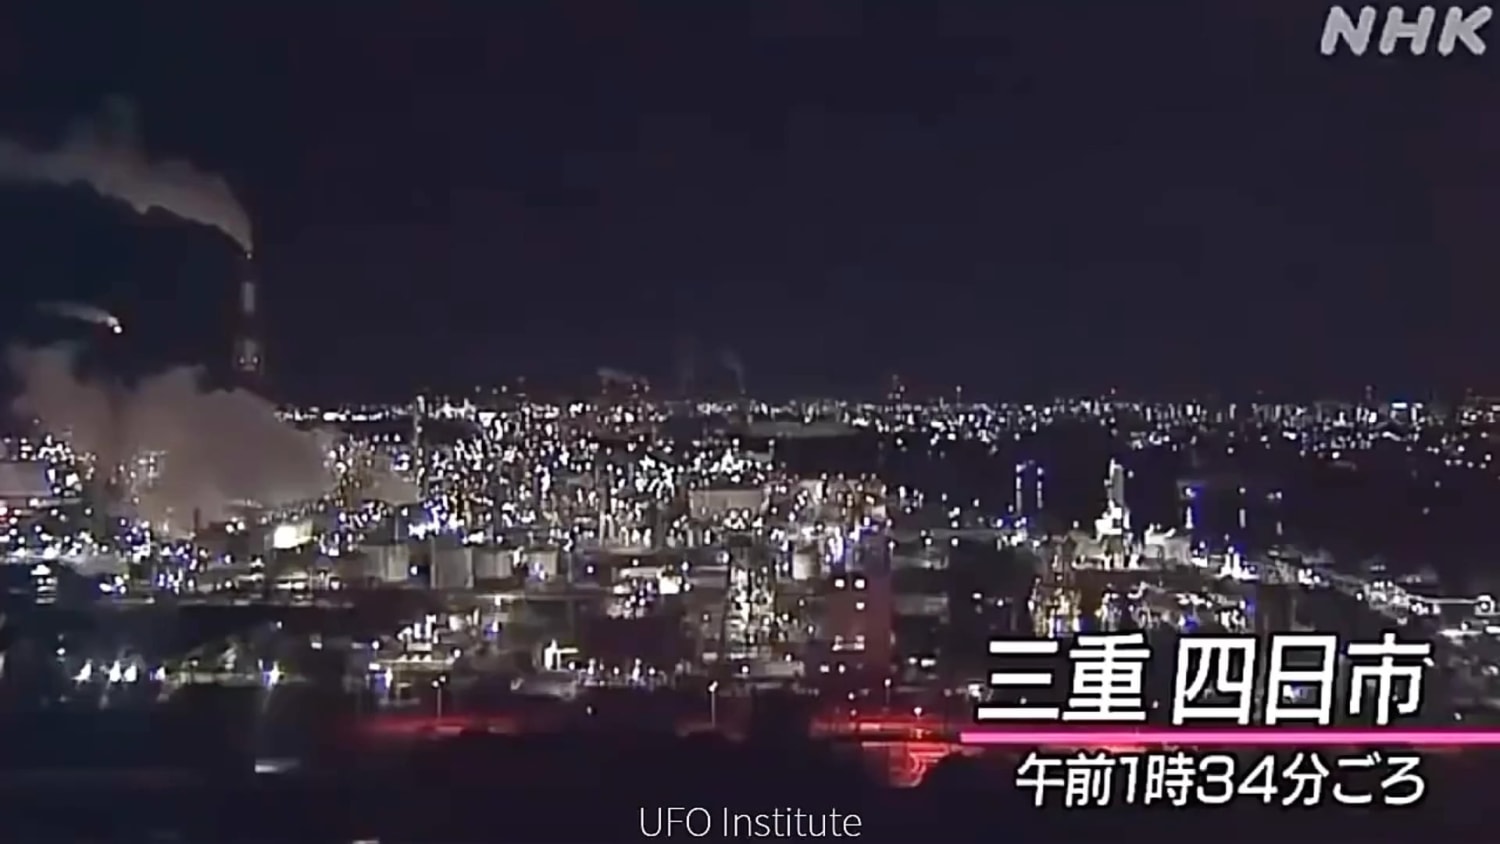 Fall of a meteor over Japan captured by NHK. 29th november -☄️